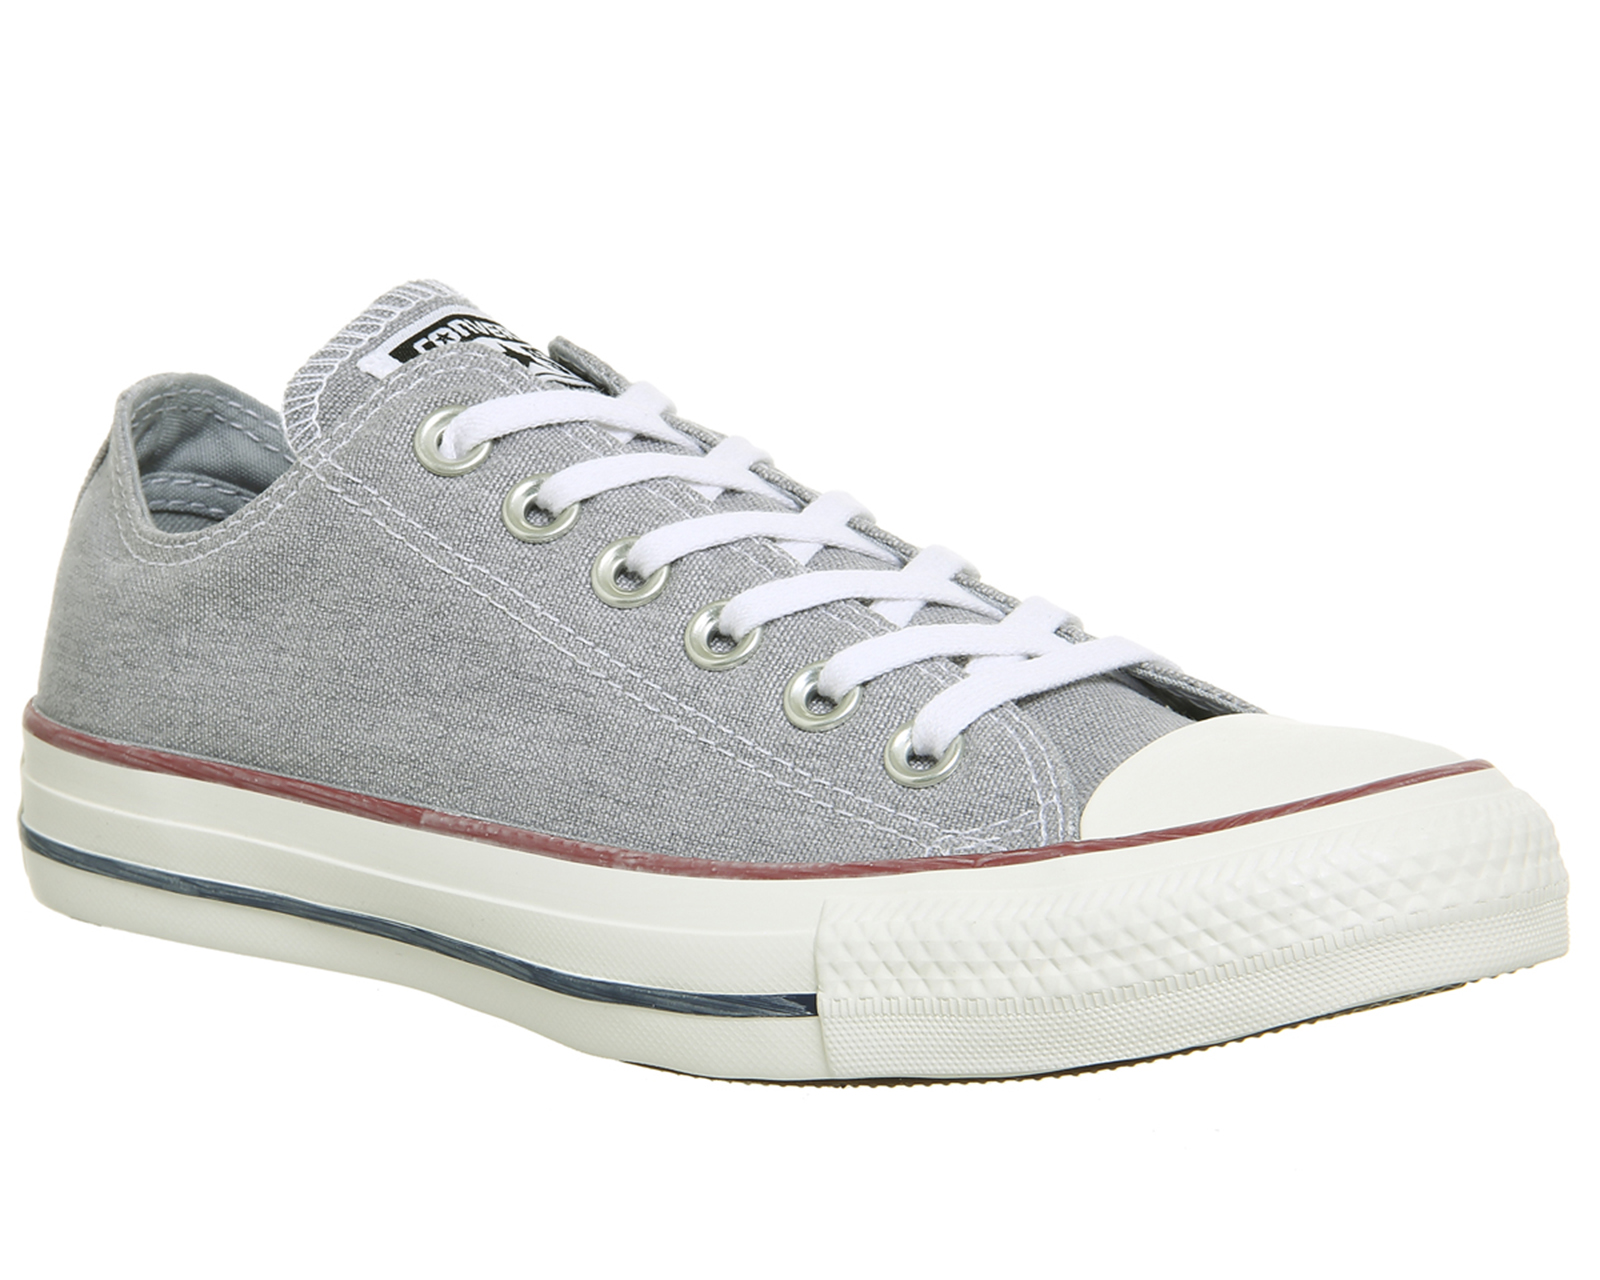 converse all star low uk